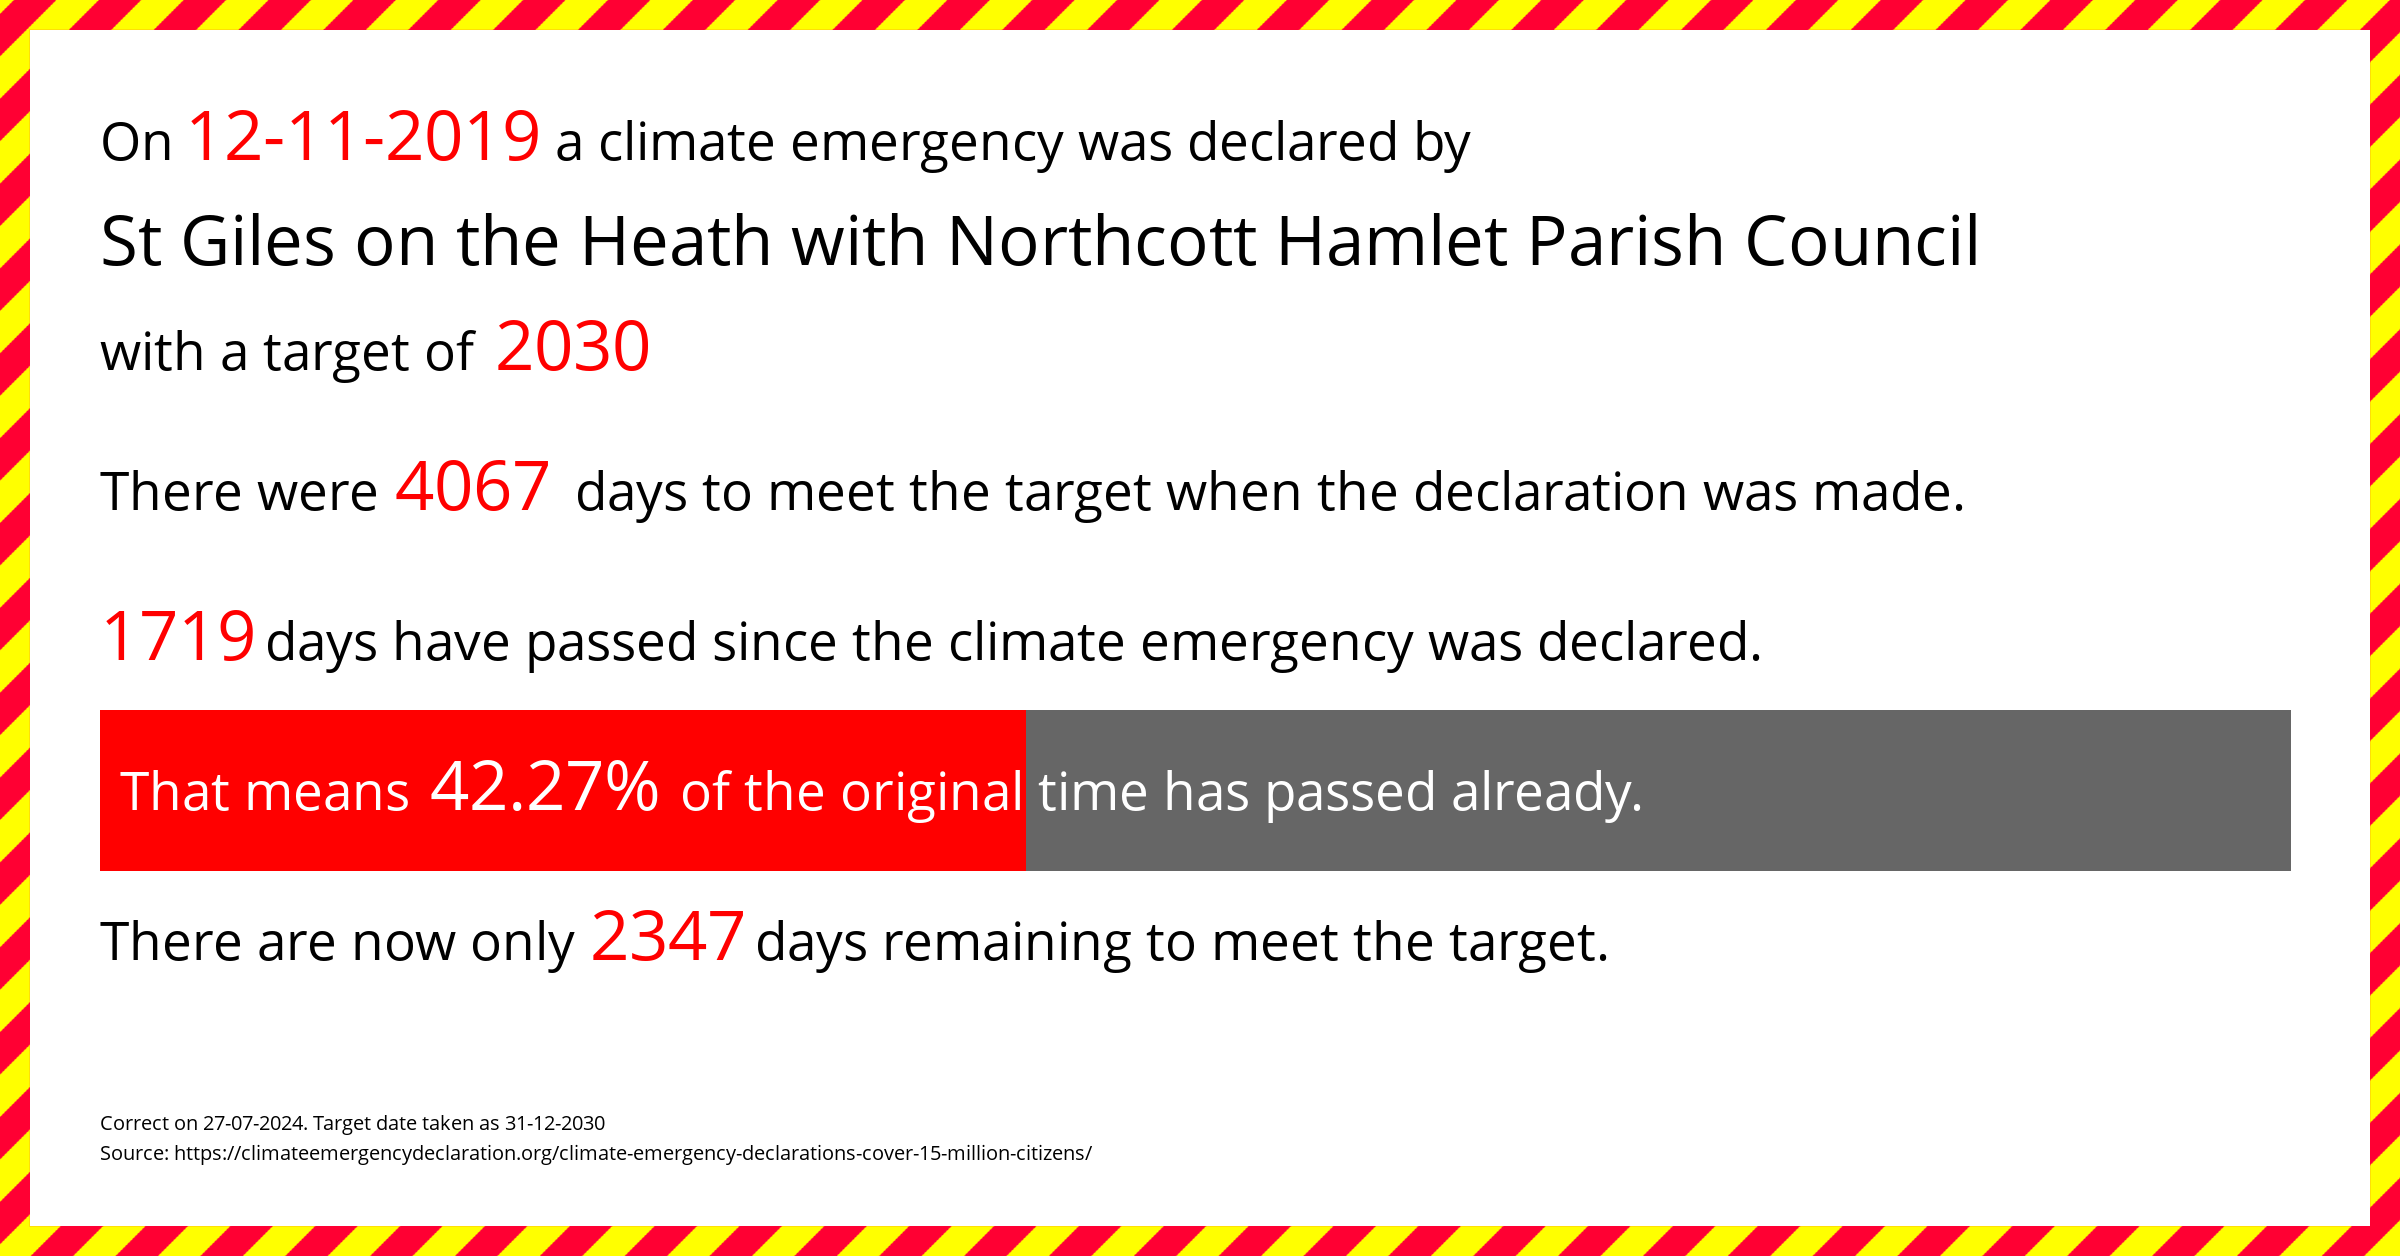 St Giles on the Heath with Northcott Hamlet Parish Council declared a Climate emergency on Tuesday 12th November 2019, with a target of 2030.